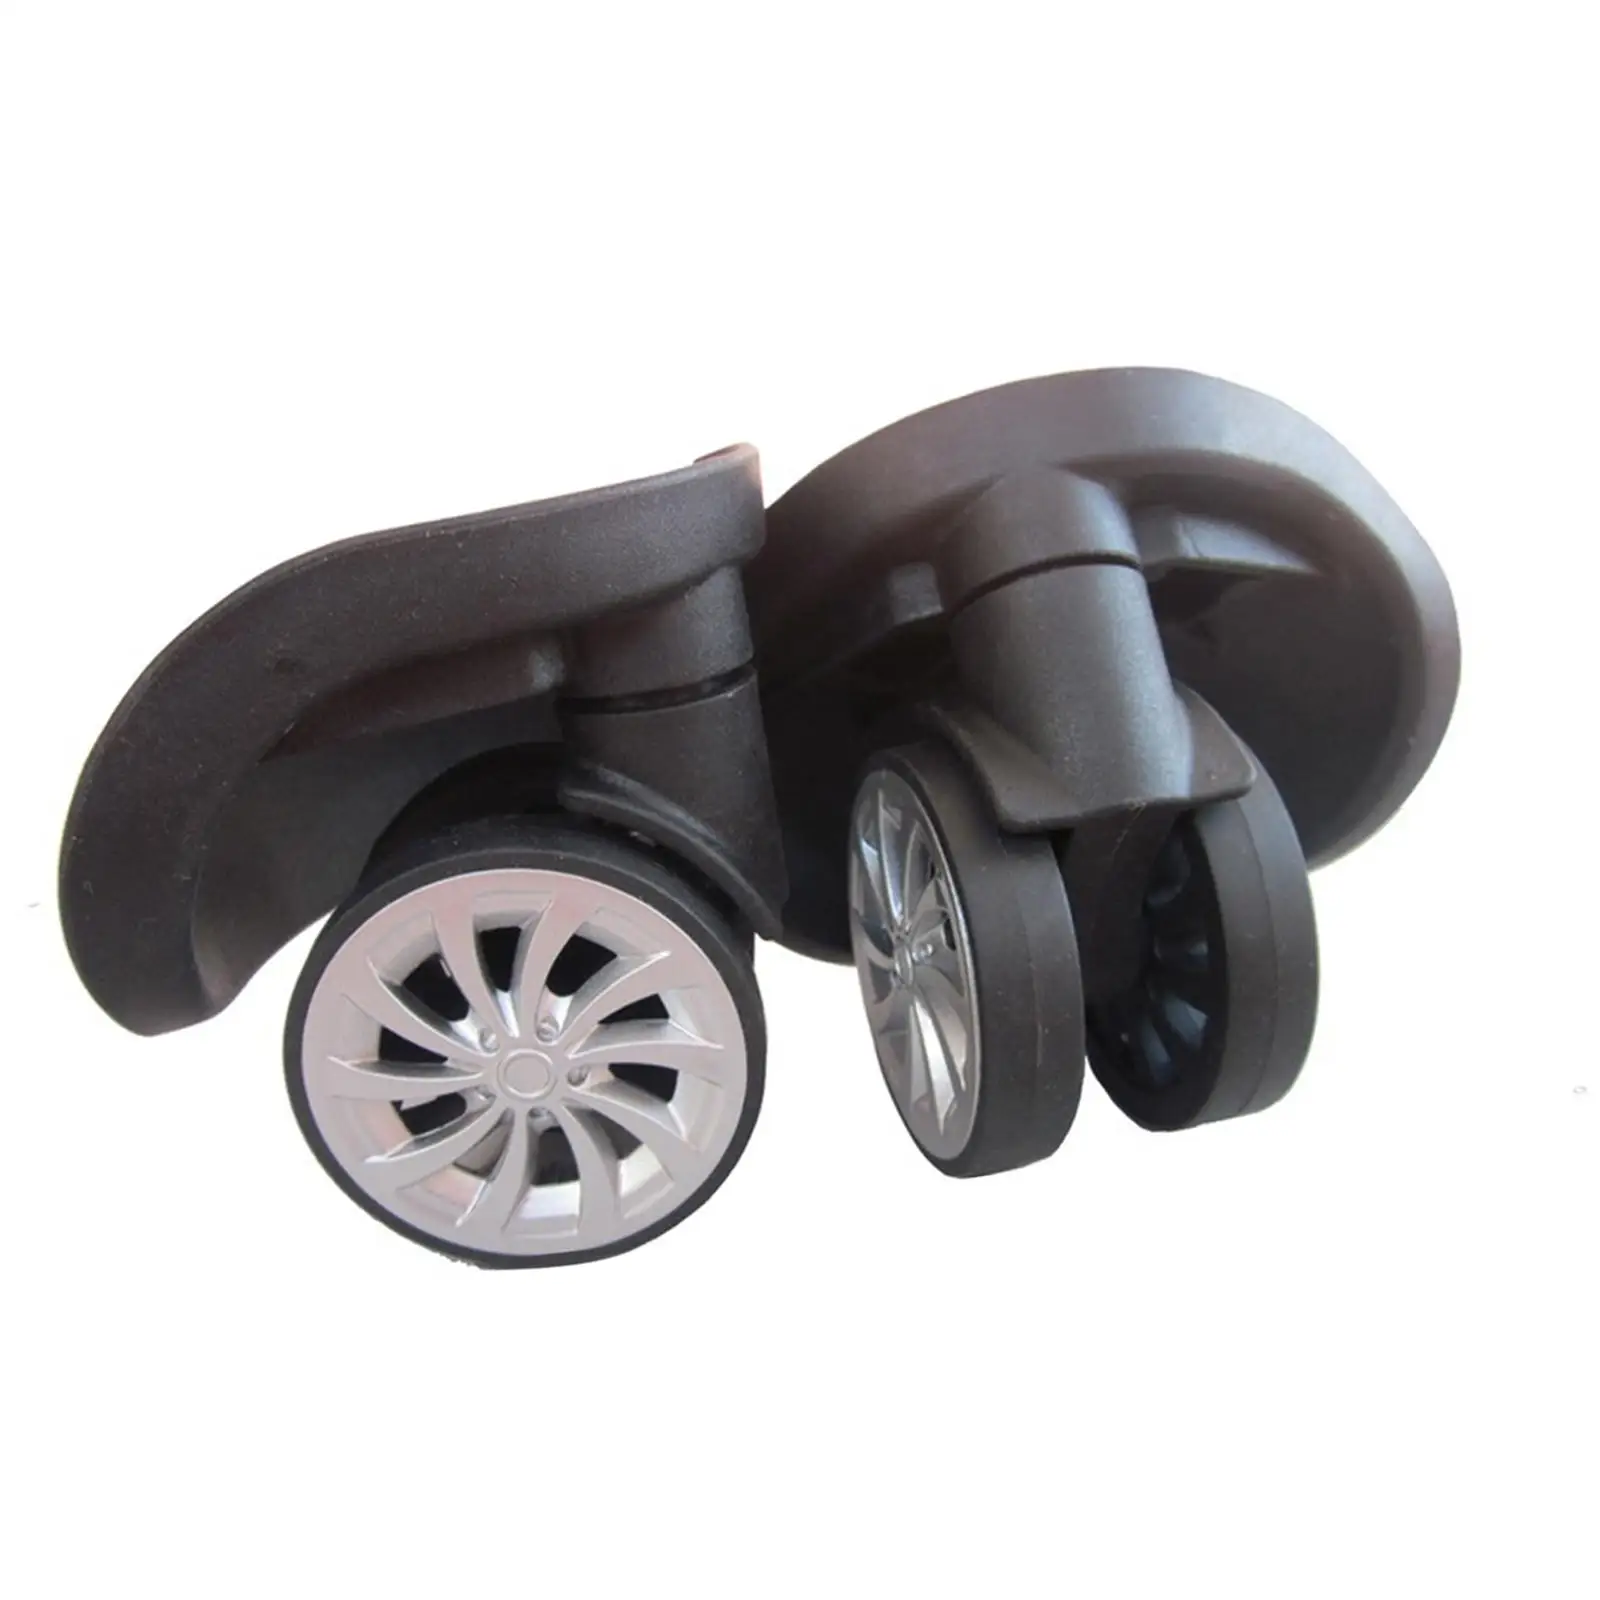 

Universal Luggage Suitcase Replacement Wheels Swivel Wheels for Travel Bag Accessories